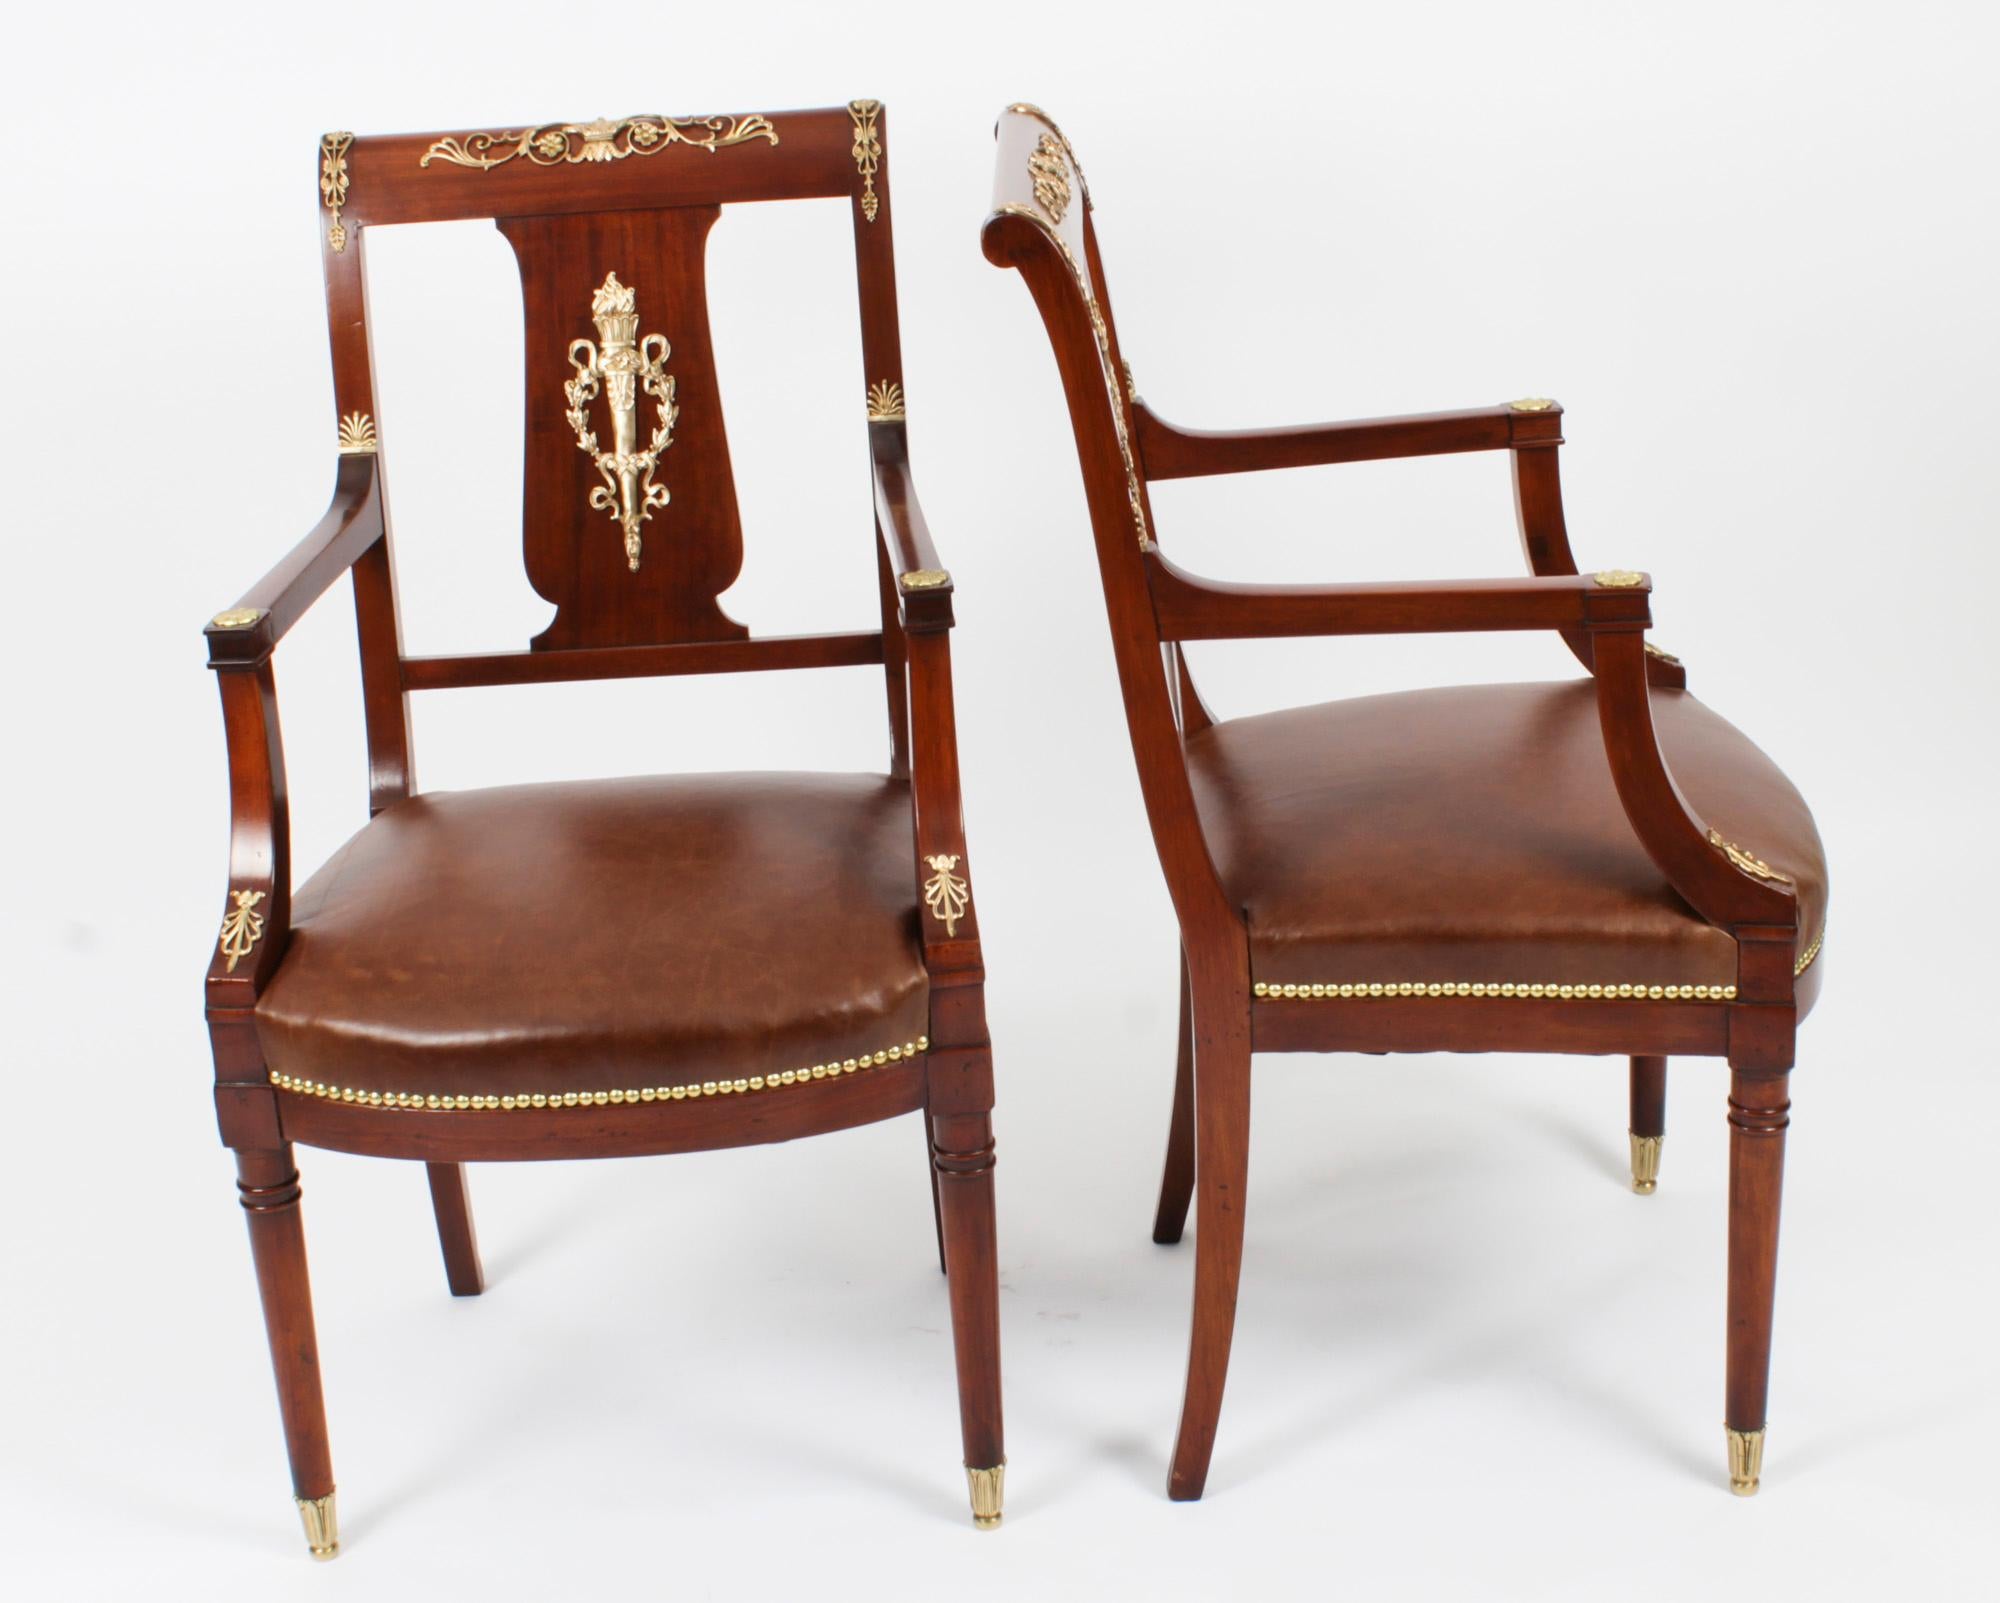 This is a fantastic and highly decorative antique pair of French gilt bronze mounted Empire Revival fauteuil armchairs, circa 1880 in date.

They have been crafted from fabulous solid mahogany and are smothered in fabulous high quality ormolu mounts